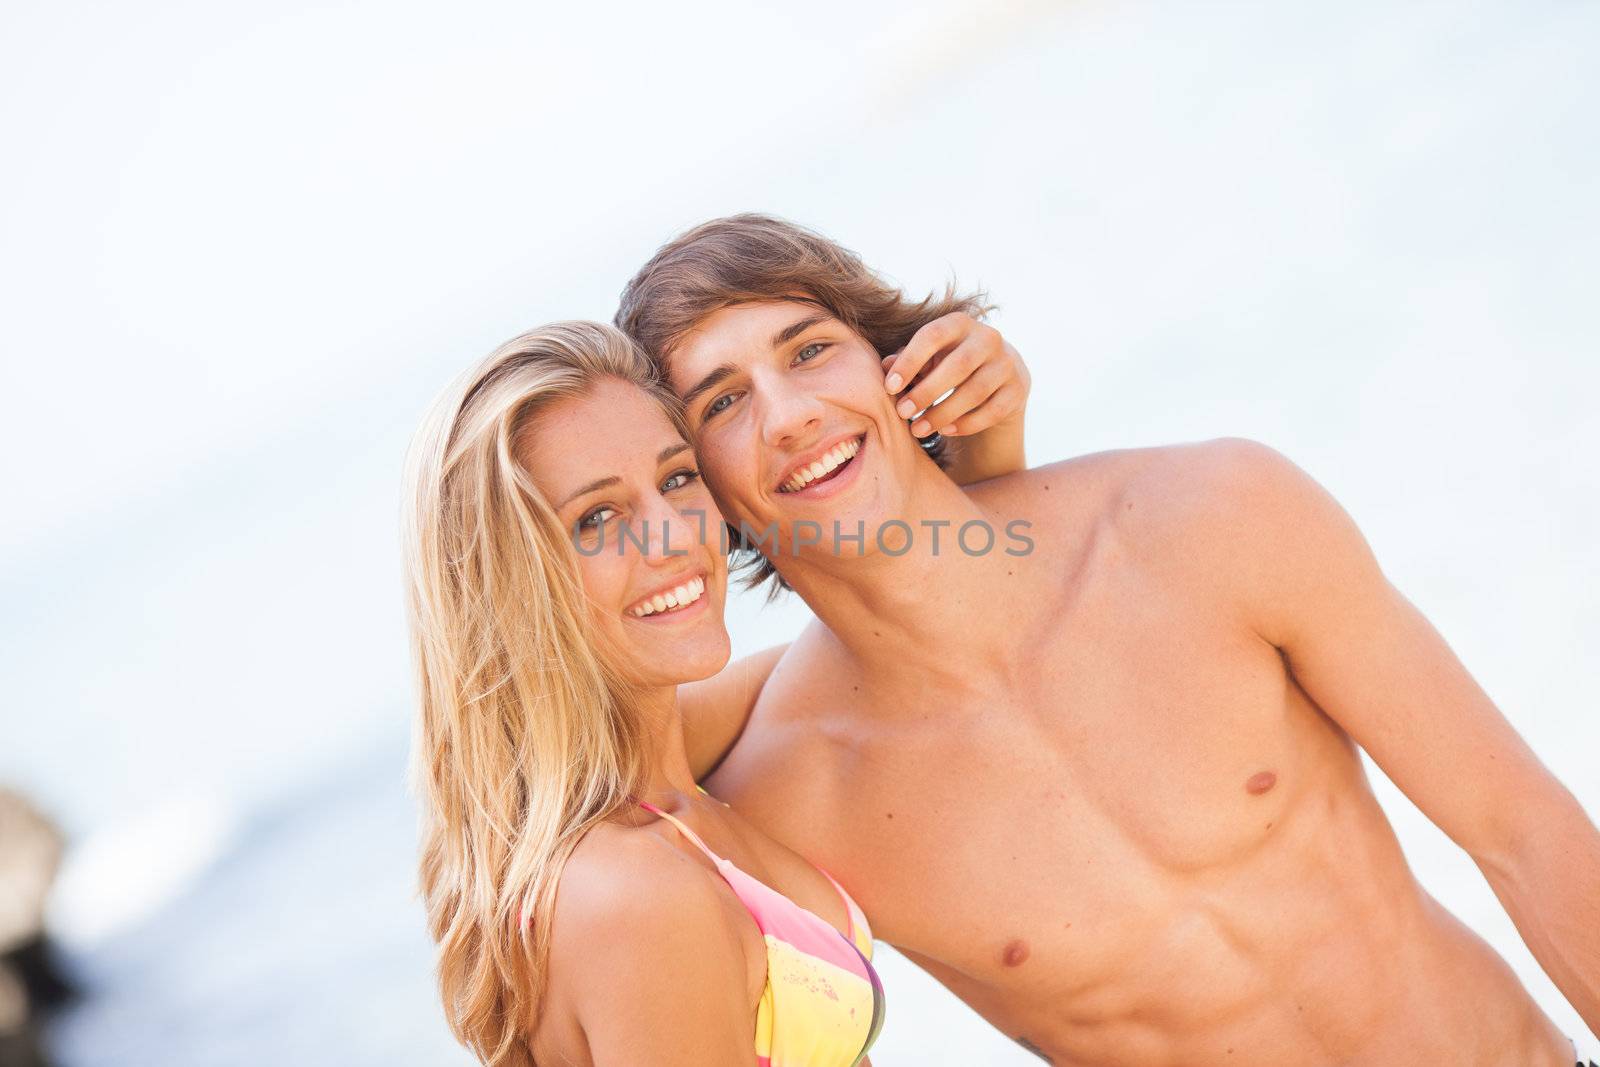 Young couple enjoying themselves at the beach